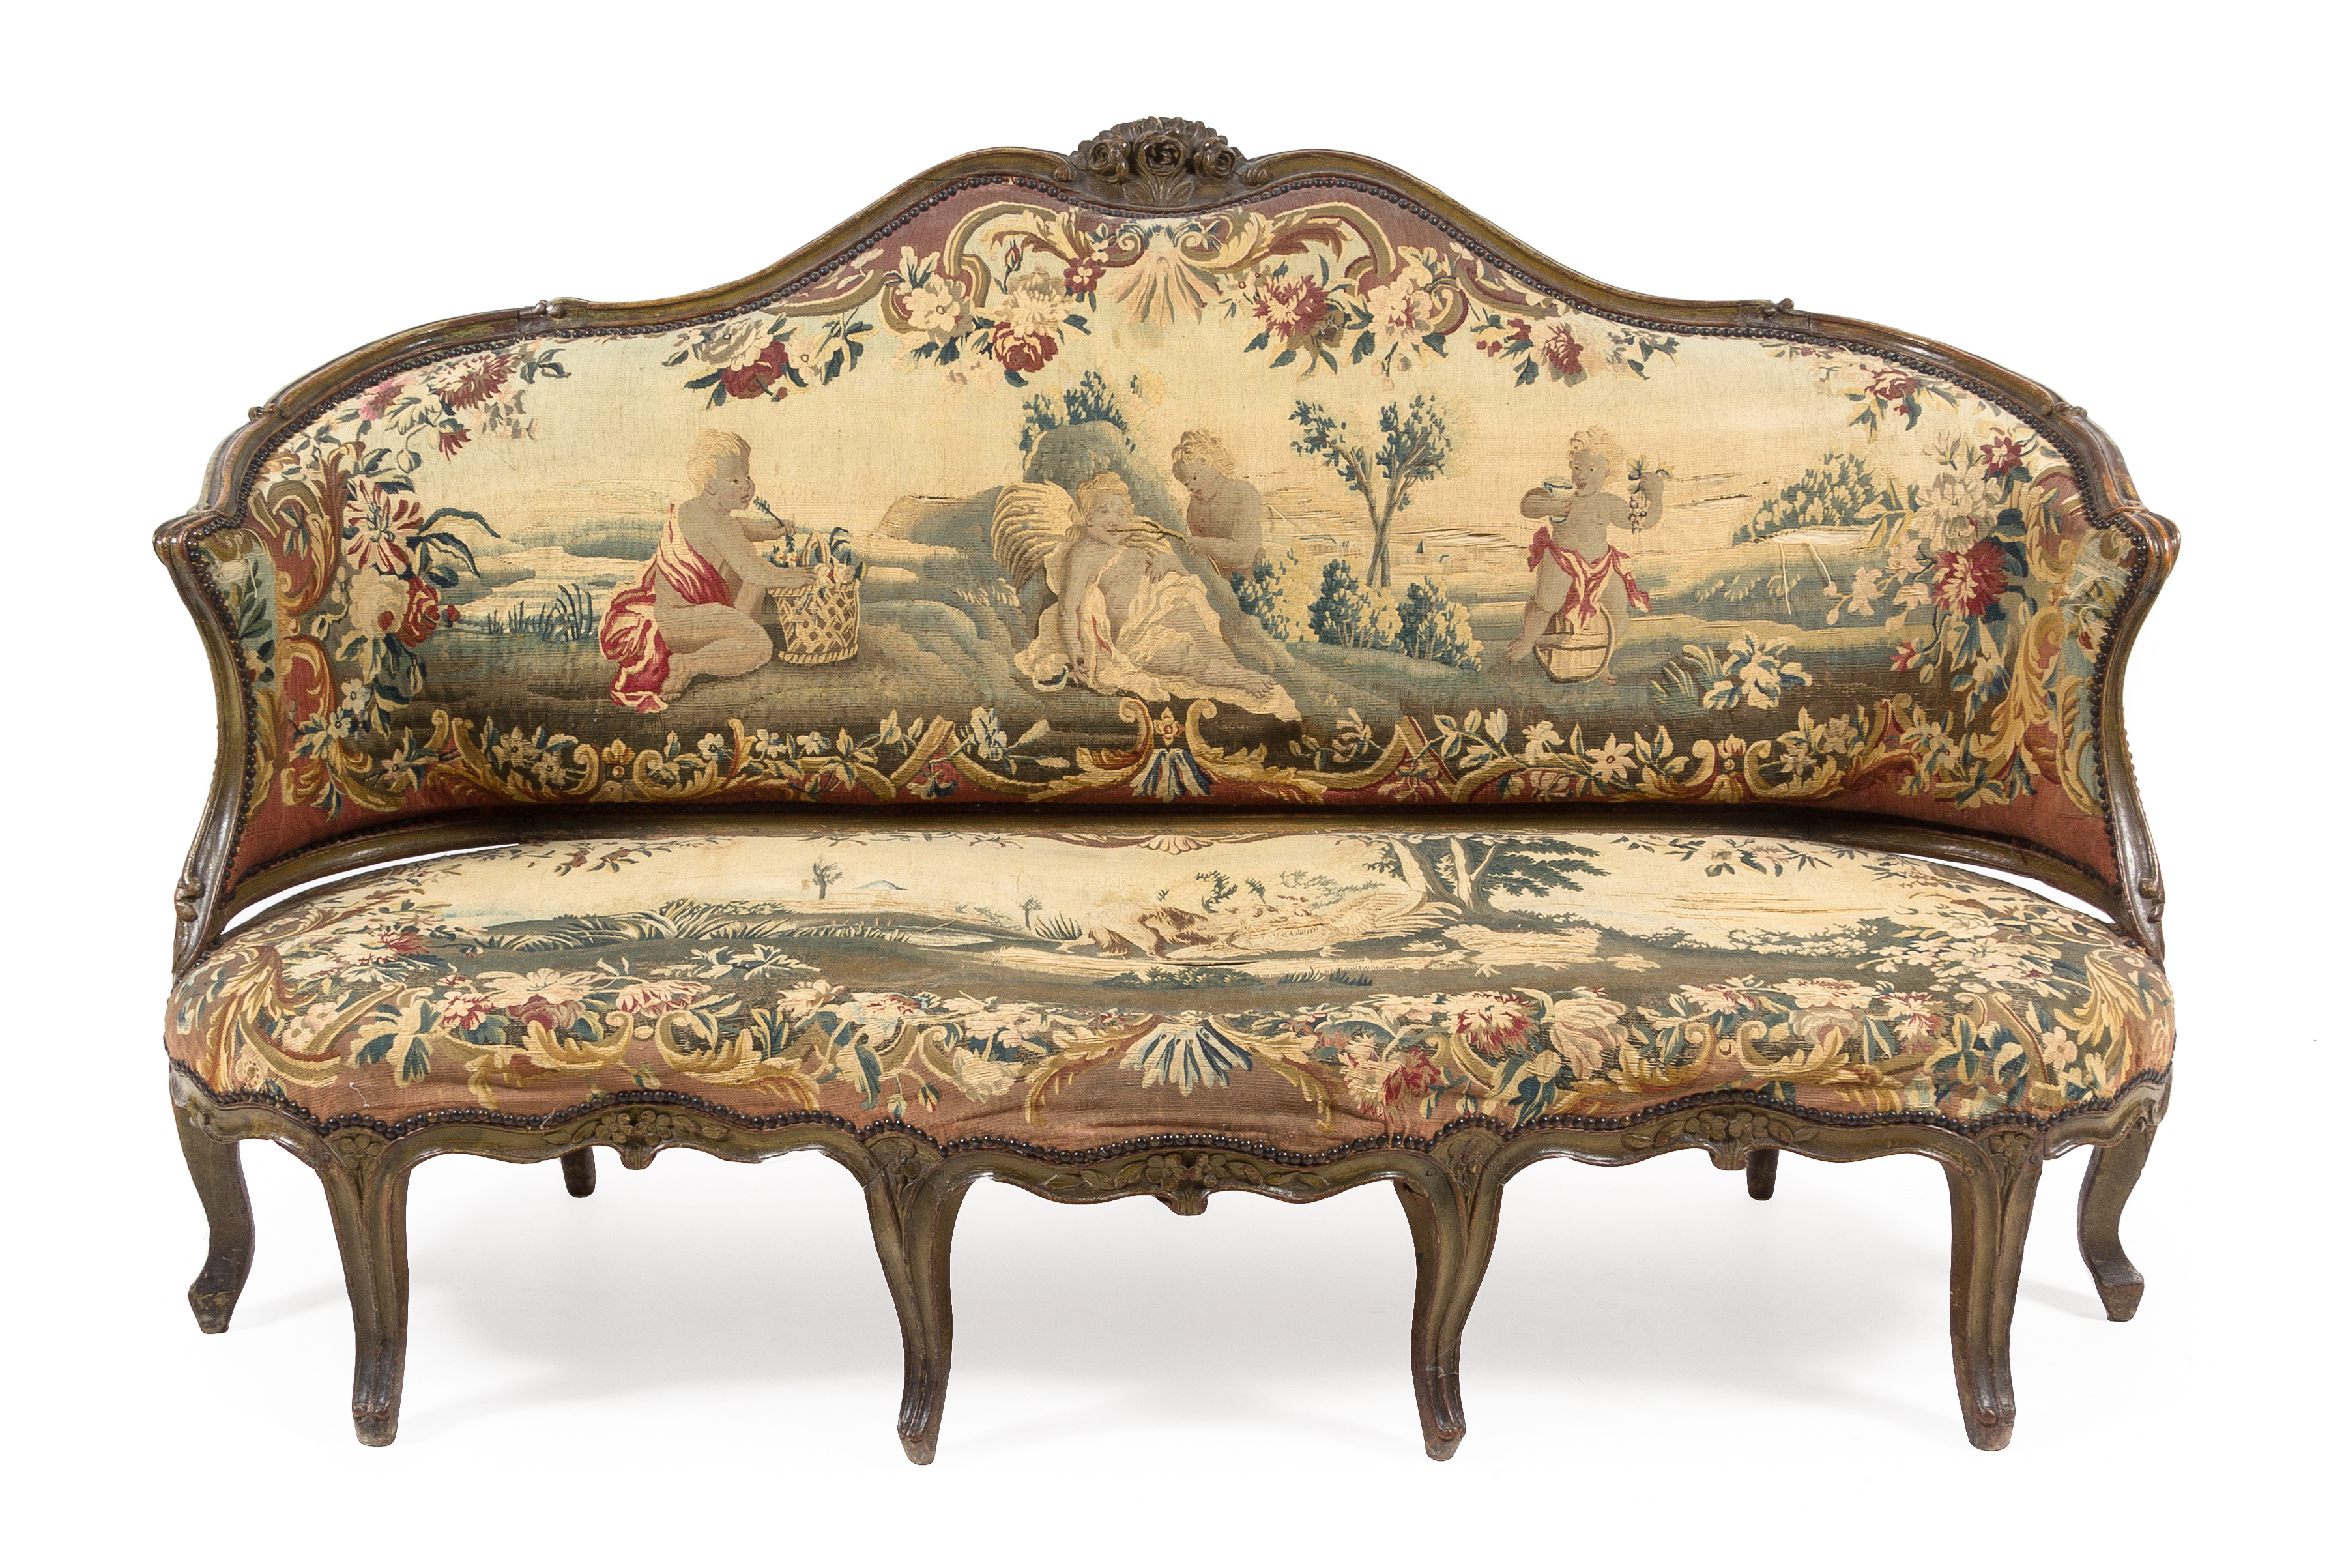 A Louis XV Painted Canape Height 45 x width 74 x depth 34 inches.